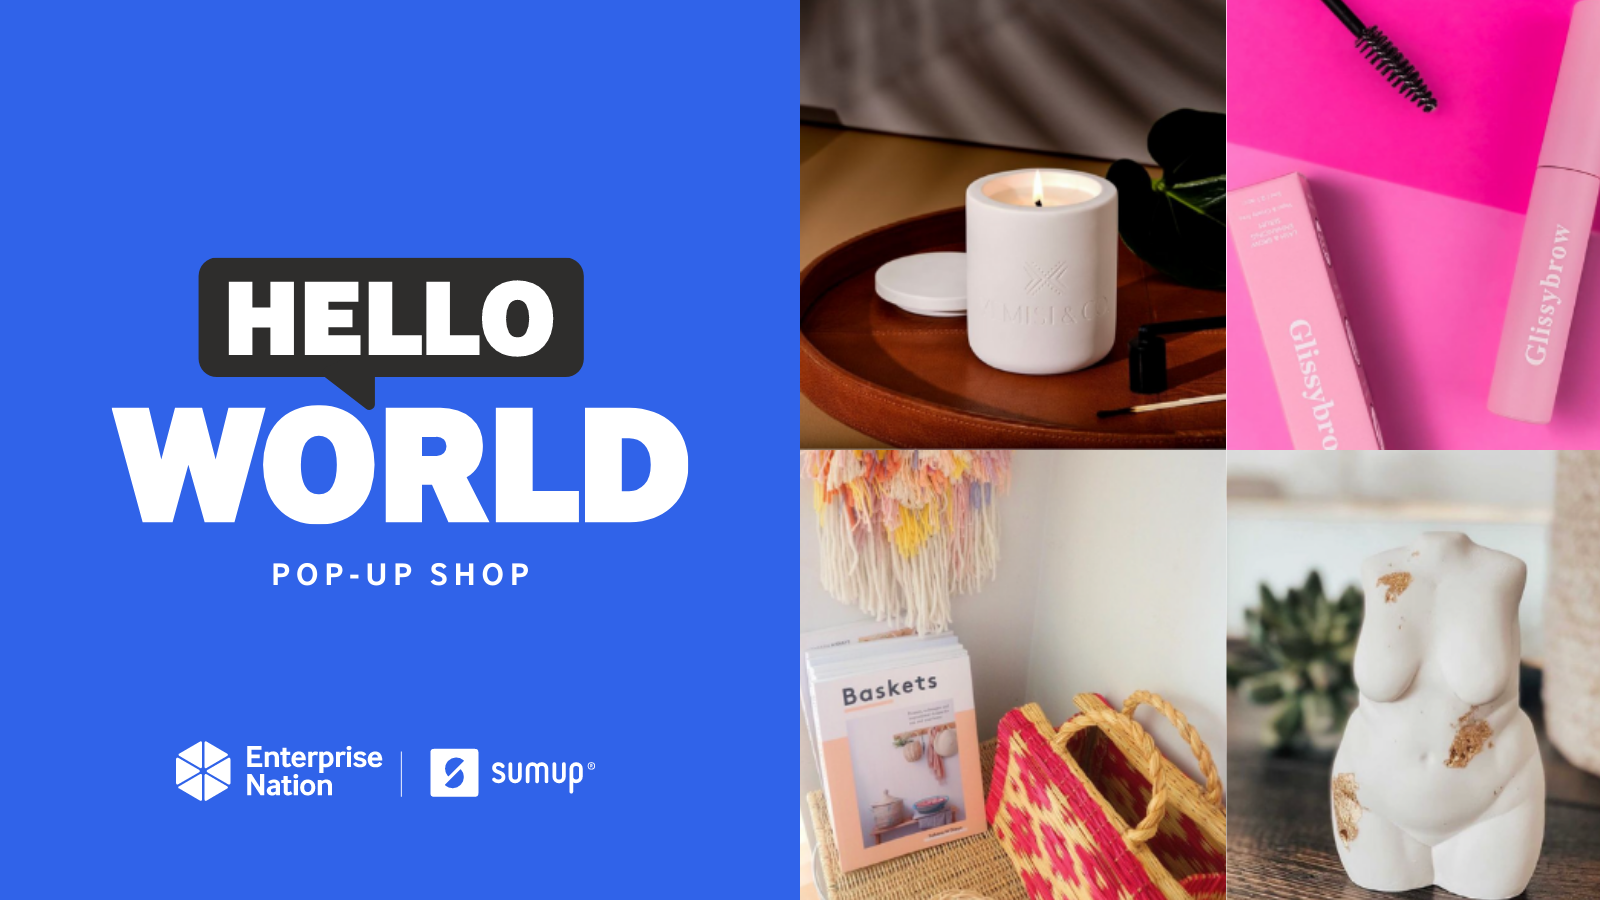 The brands popping up in week four of the Hello, World shop